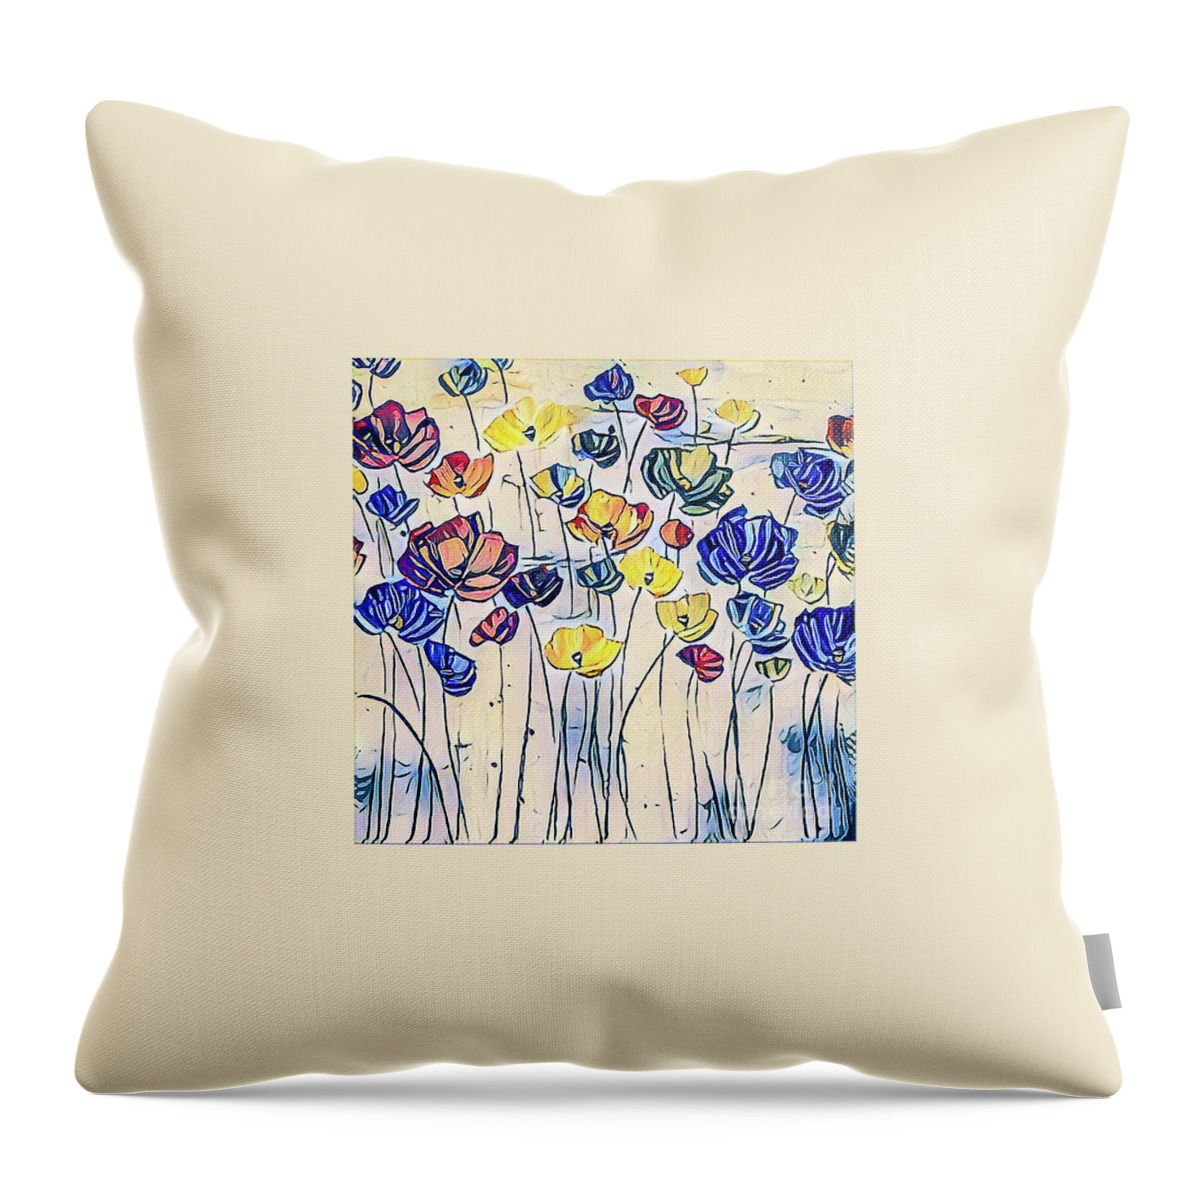 Flowers Throw Pillow featuring the mixed media Flower Stems 7 by Toni Somes